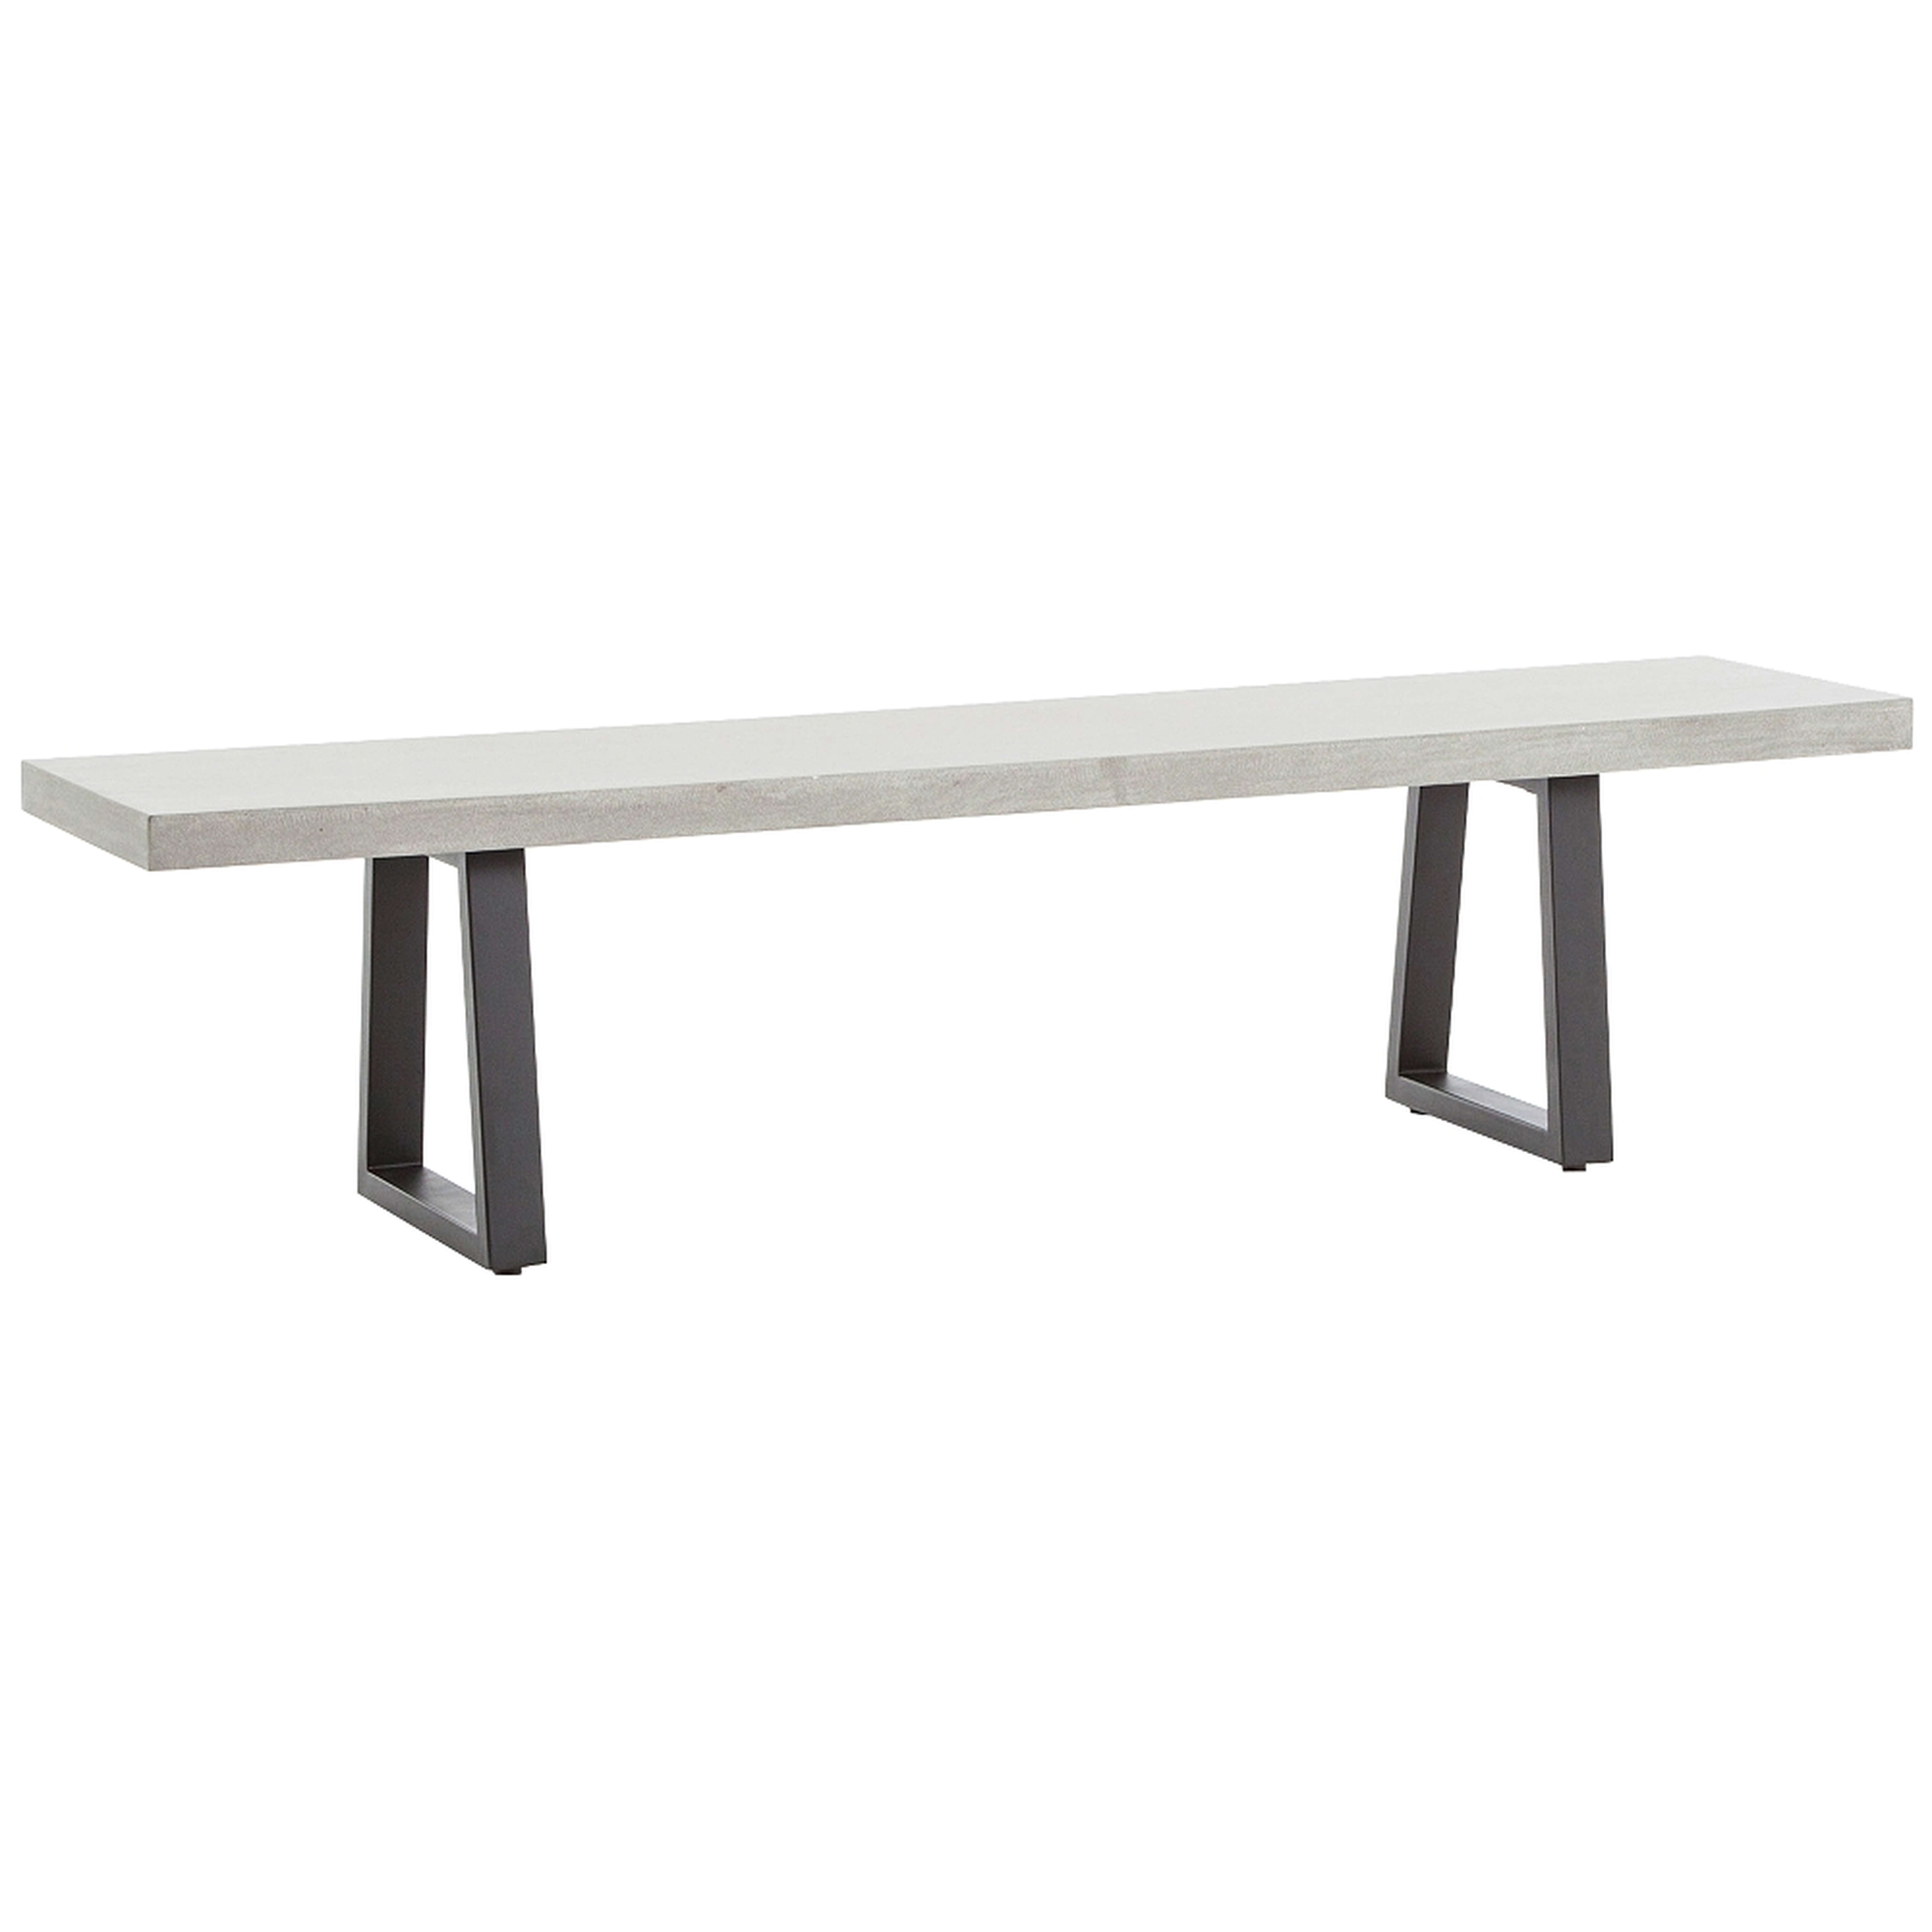 Cyrus Light Gray and Matte Black Outdoor Dining Bench - Style # 89J31 - Lamps Plus